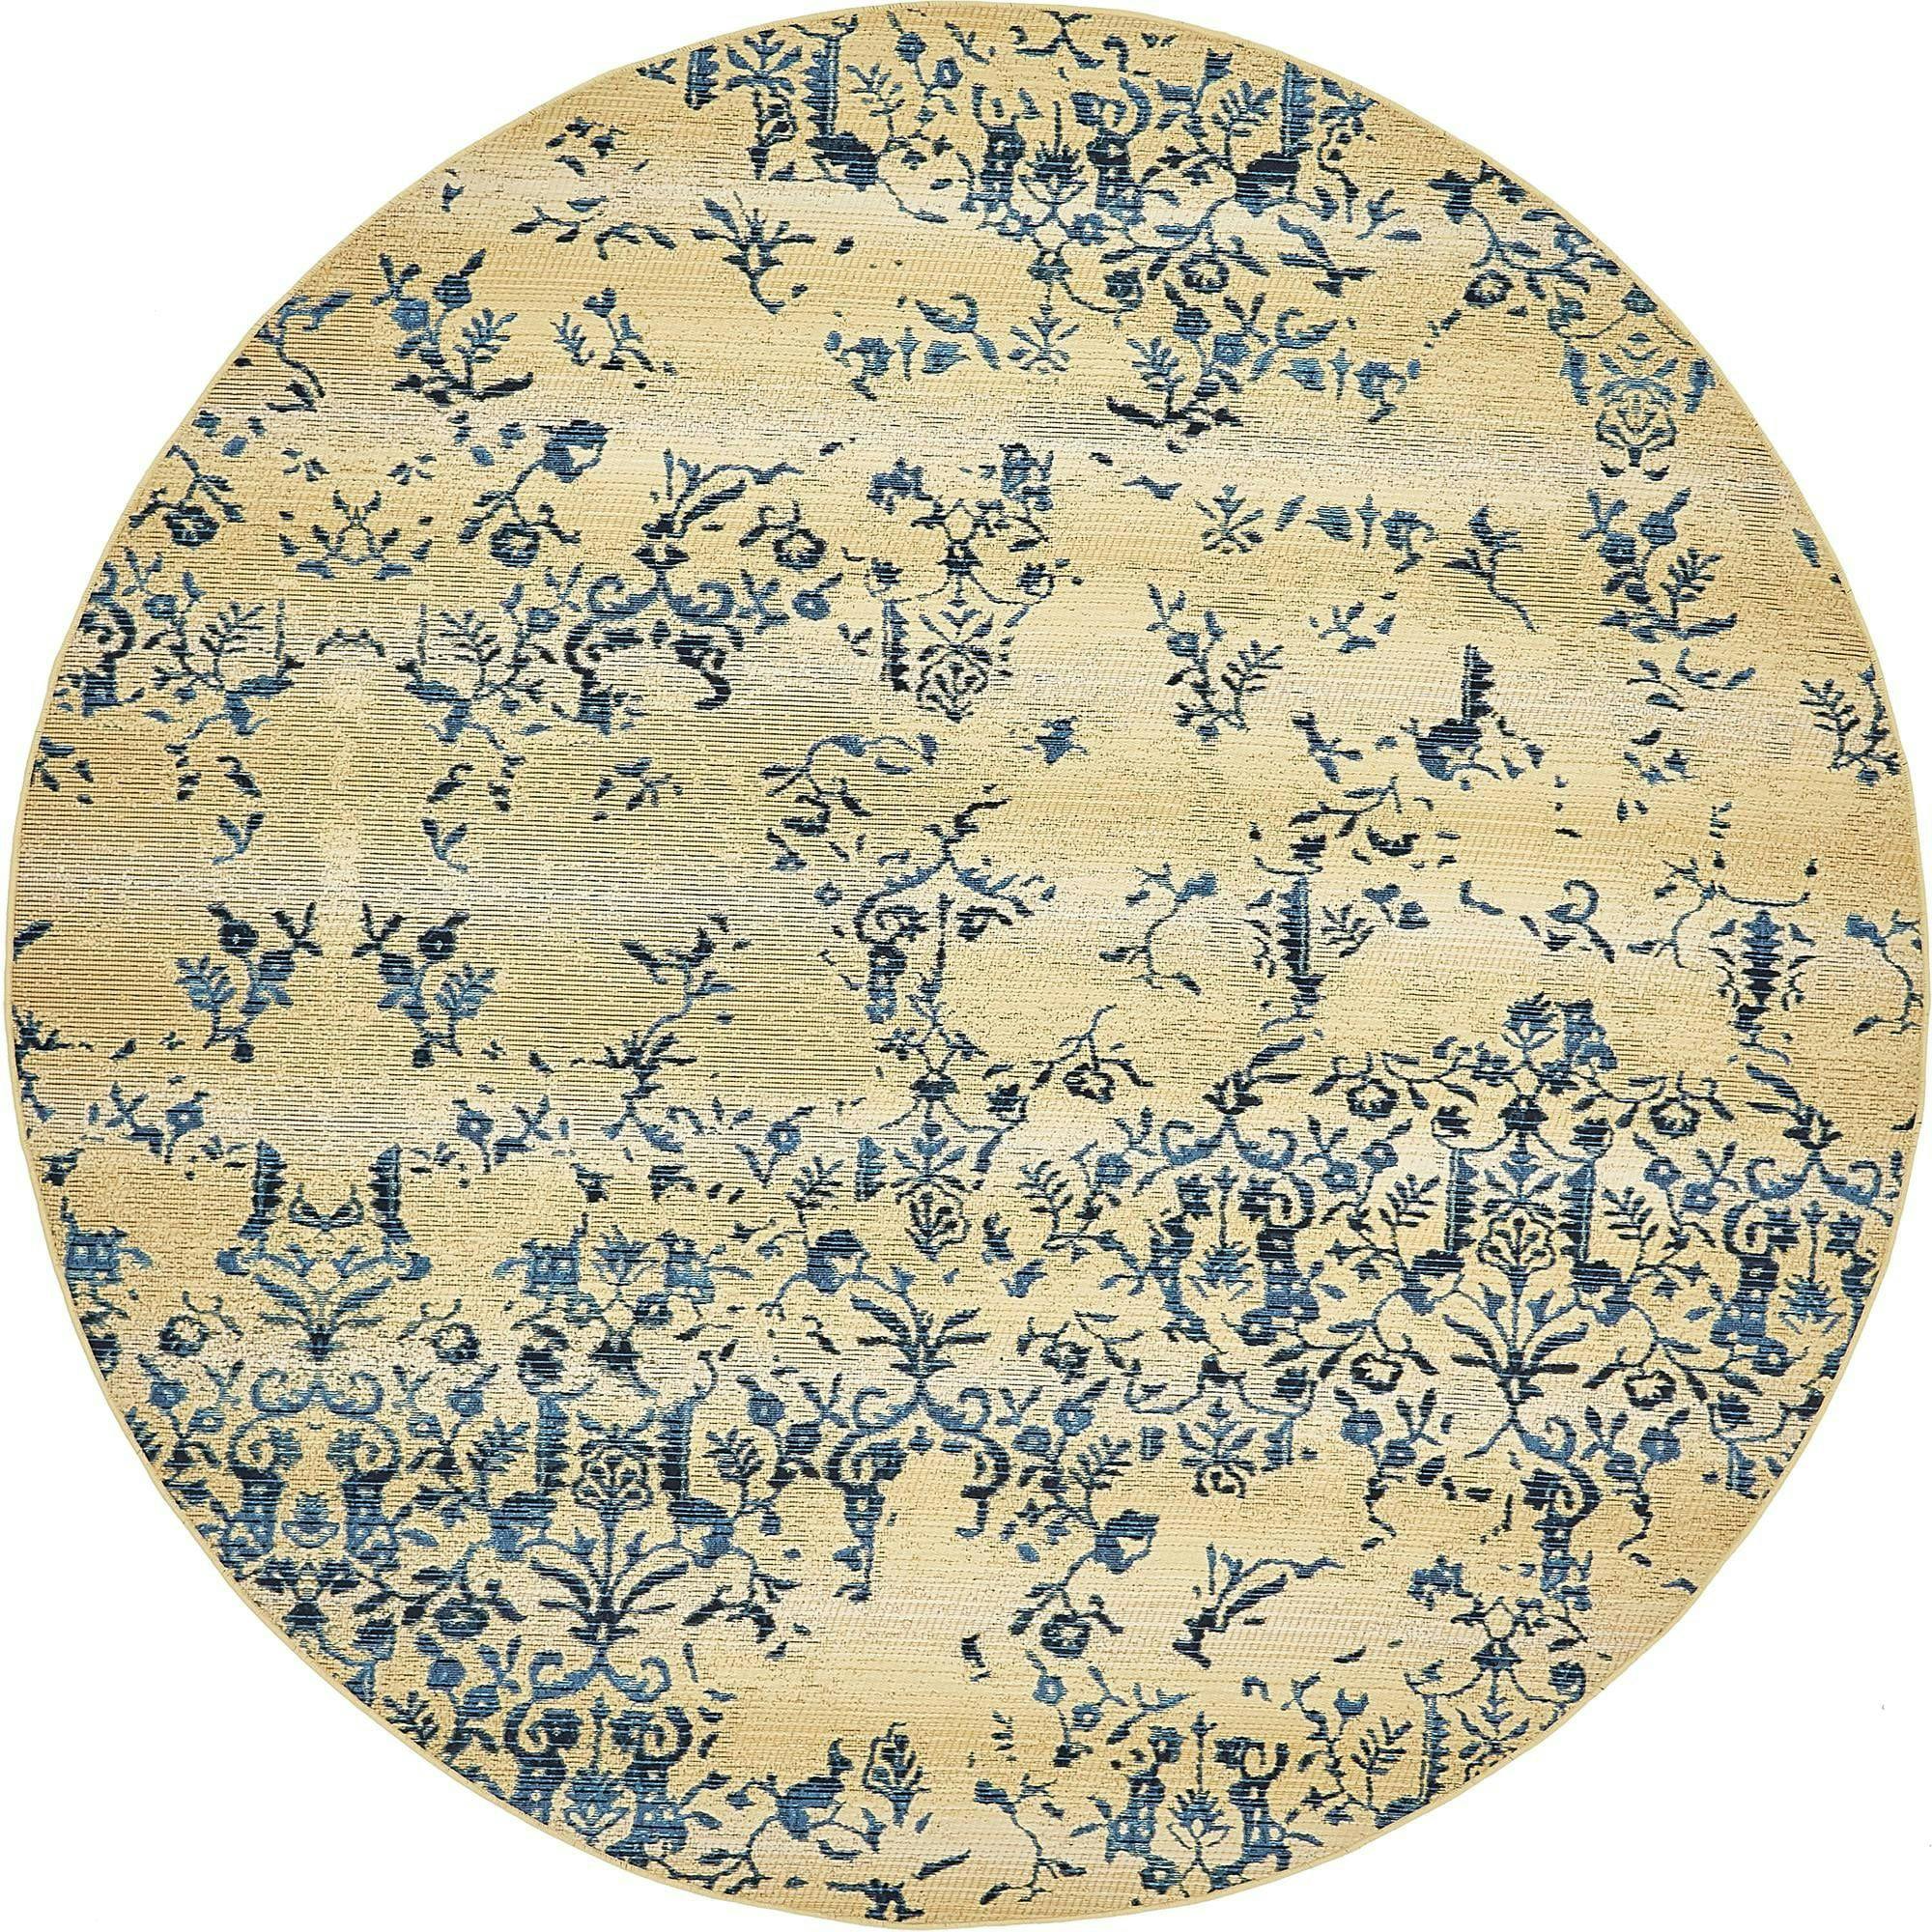 All-Season Beige Synthetic 8' Round Outdoor Rug with Stain-Resistant Weave